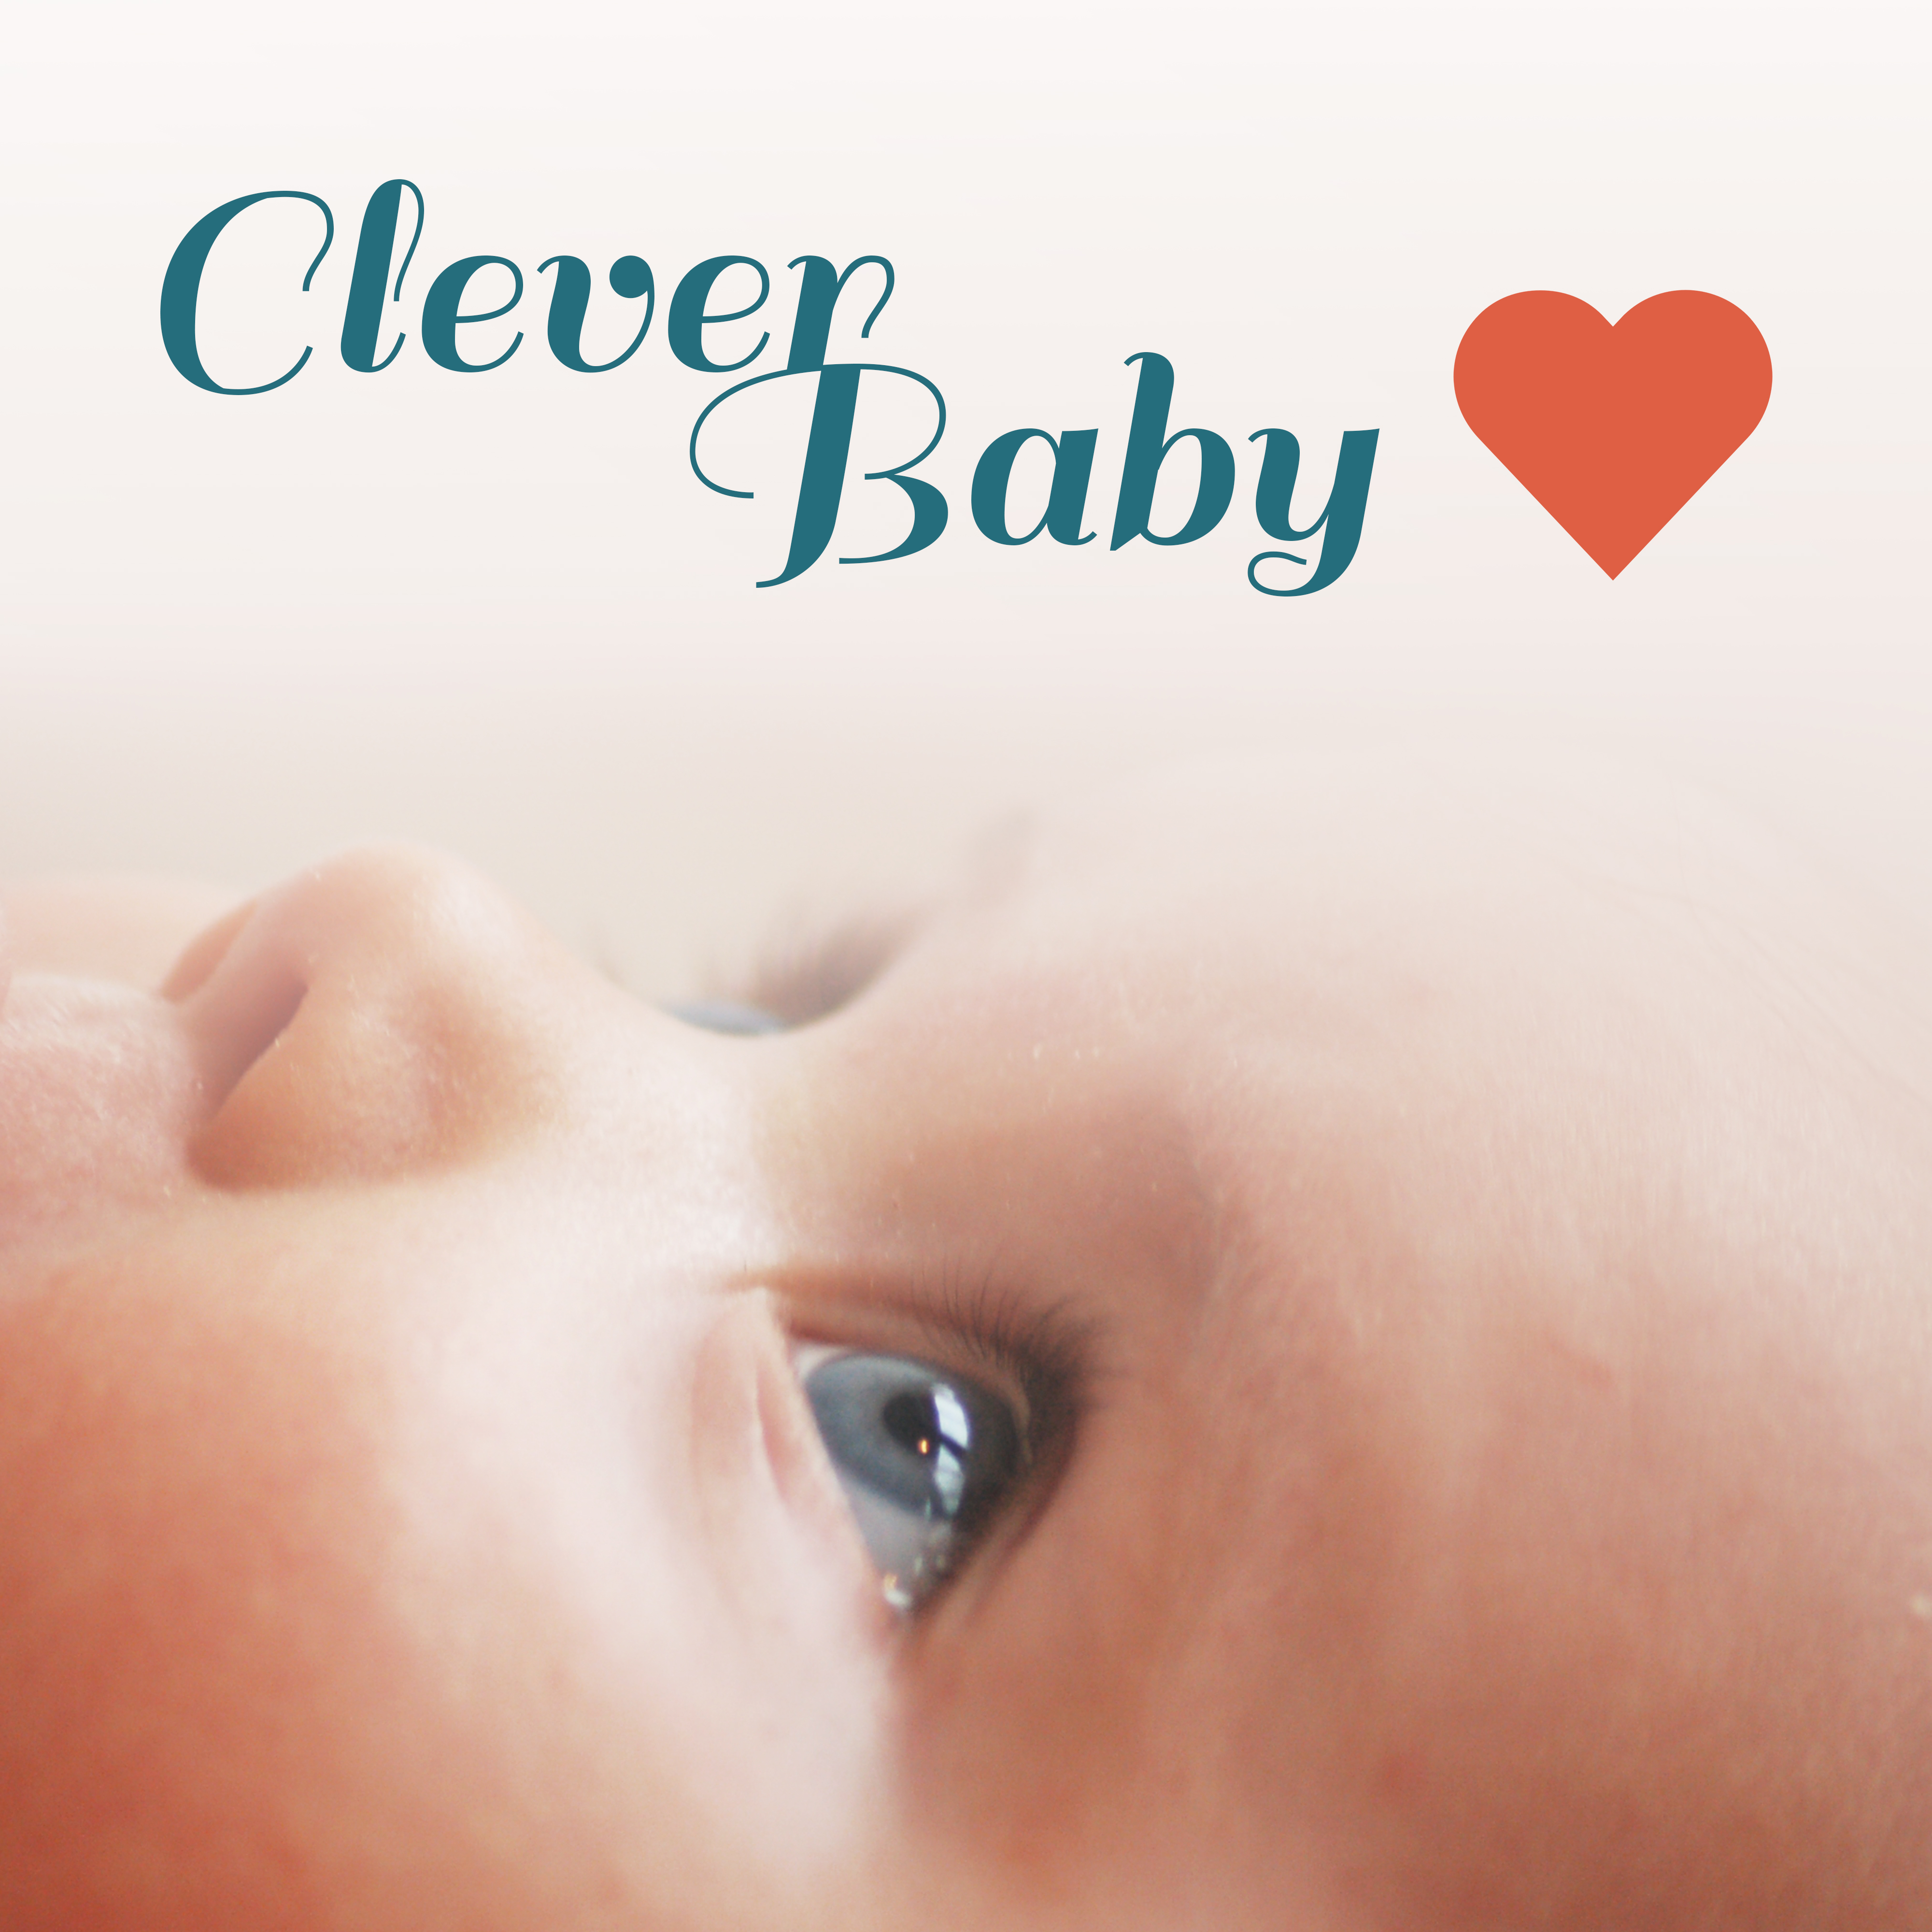 Clever Baby – Classical Music for Kids, Growing Brain, Deep Focus, Einstein Effect, Smart Toddler, Mozart, Beethoven, Bach